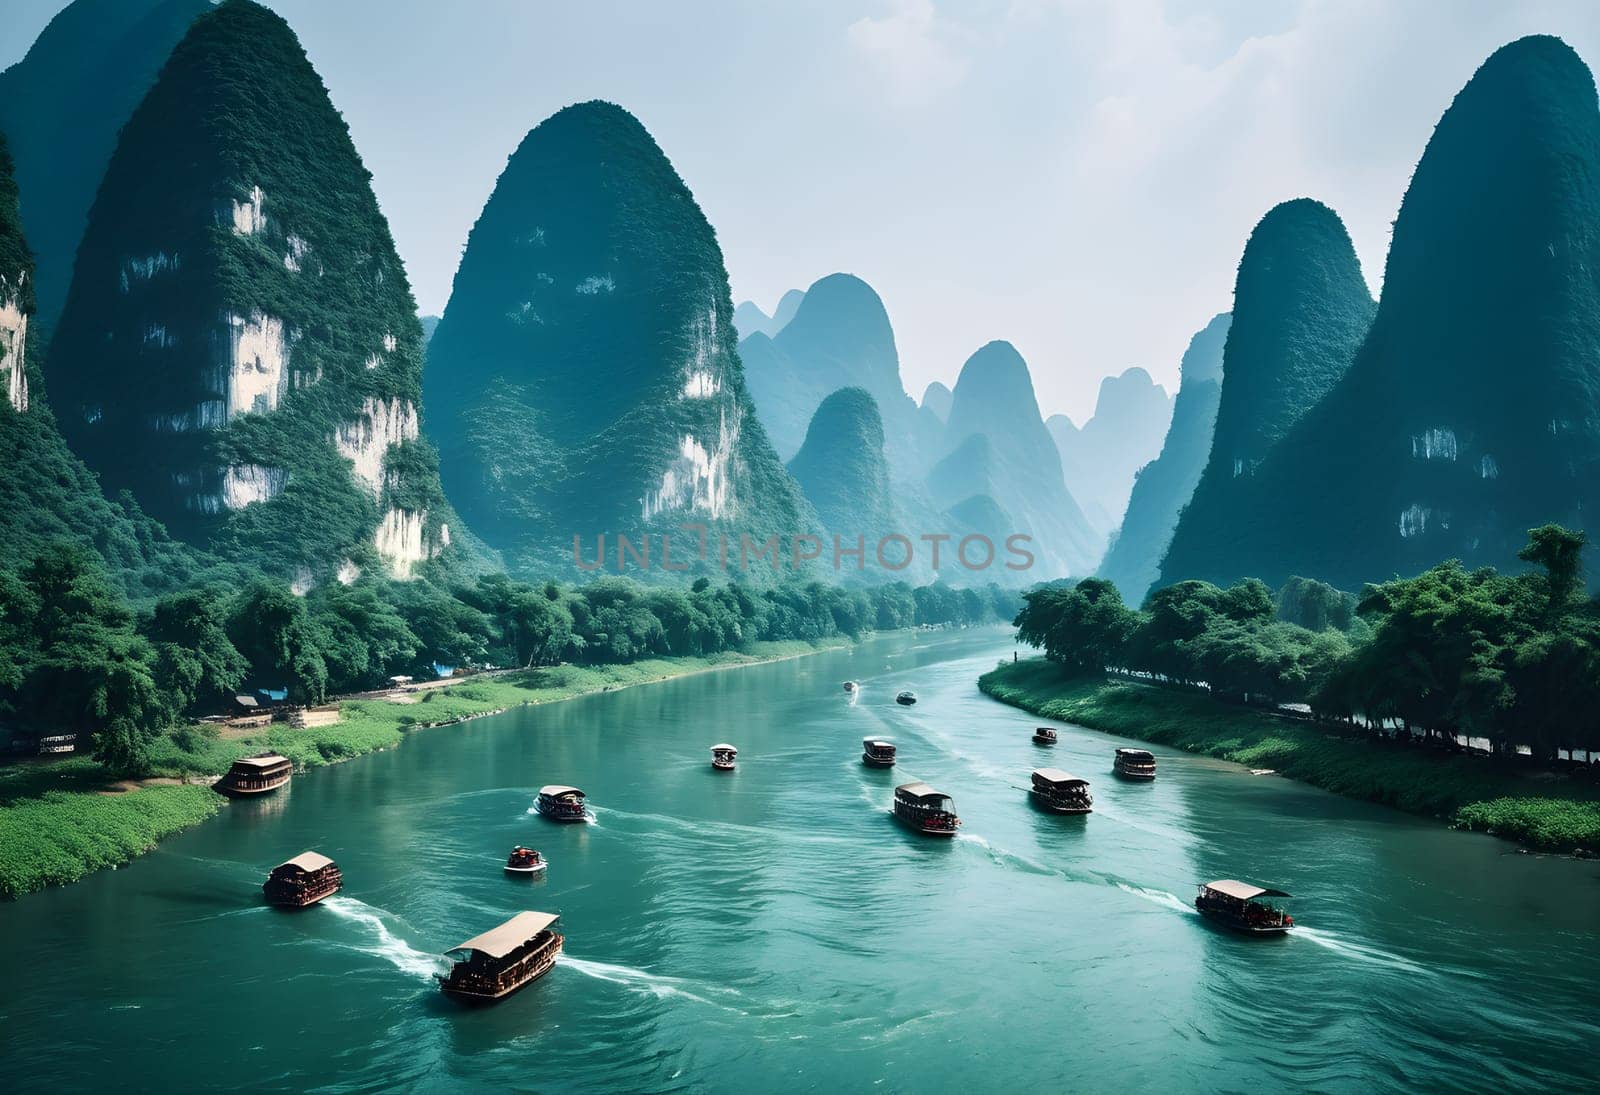 Majestic Guilin: Discovering the Beauty of the Li River in China's Karst Wonderland